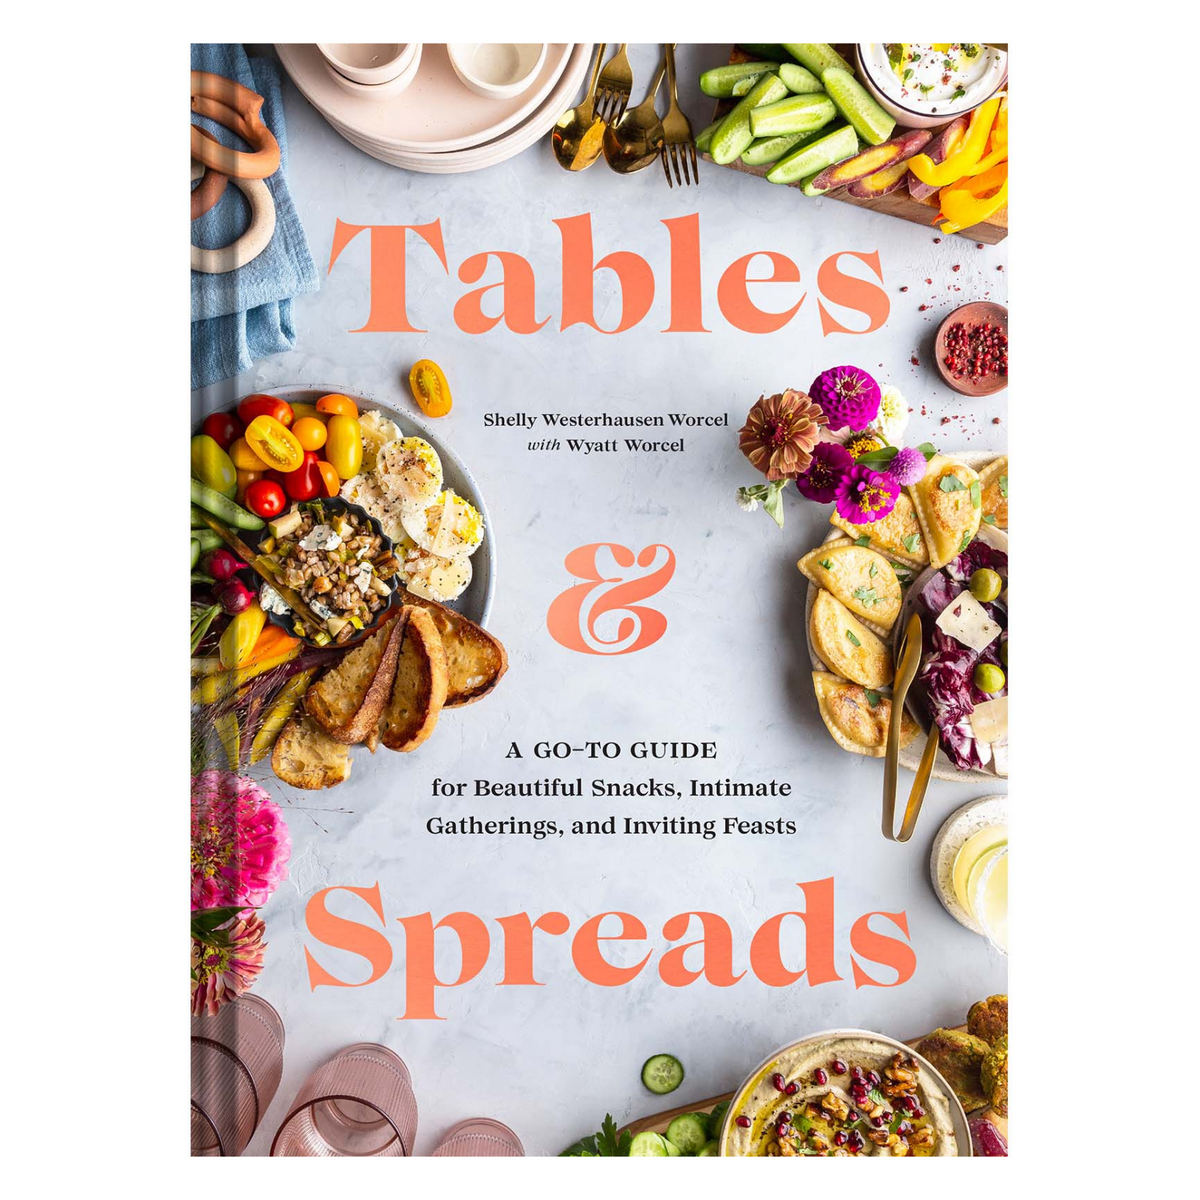 Tables &amp; Spreads